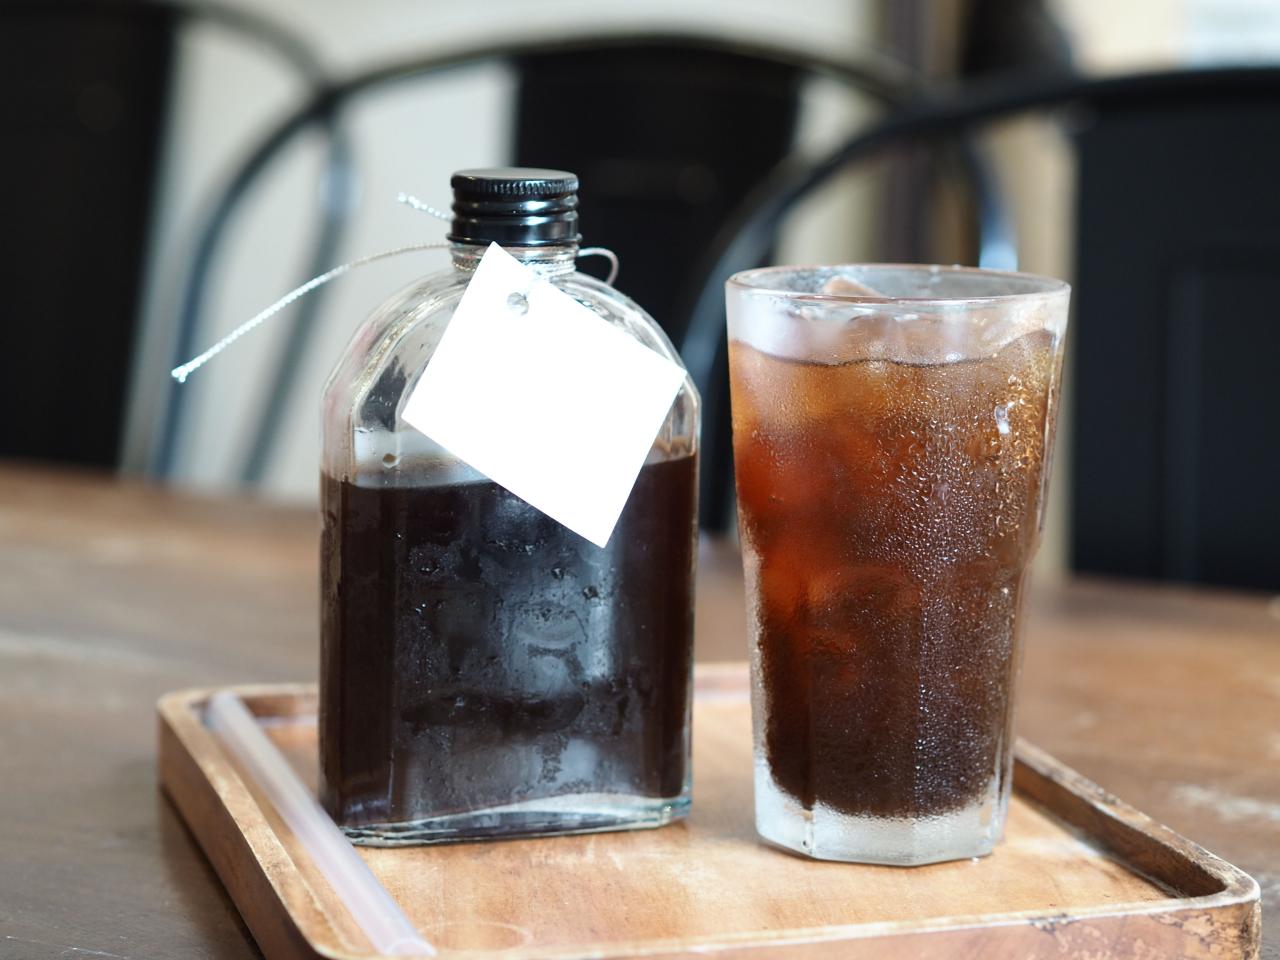 https://food.fnr.sndimg.com/content/dam/images/food/fullset/2022/02/25/iced-coffee-cold-brew-bottle-tag-wood-surface.jpg.rend.hgtvcom.1280.960.suffix/1645773651728.jpeg